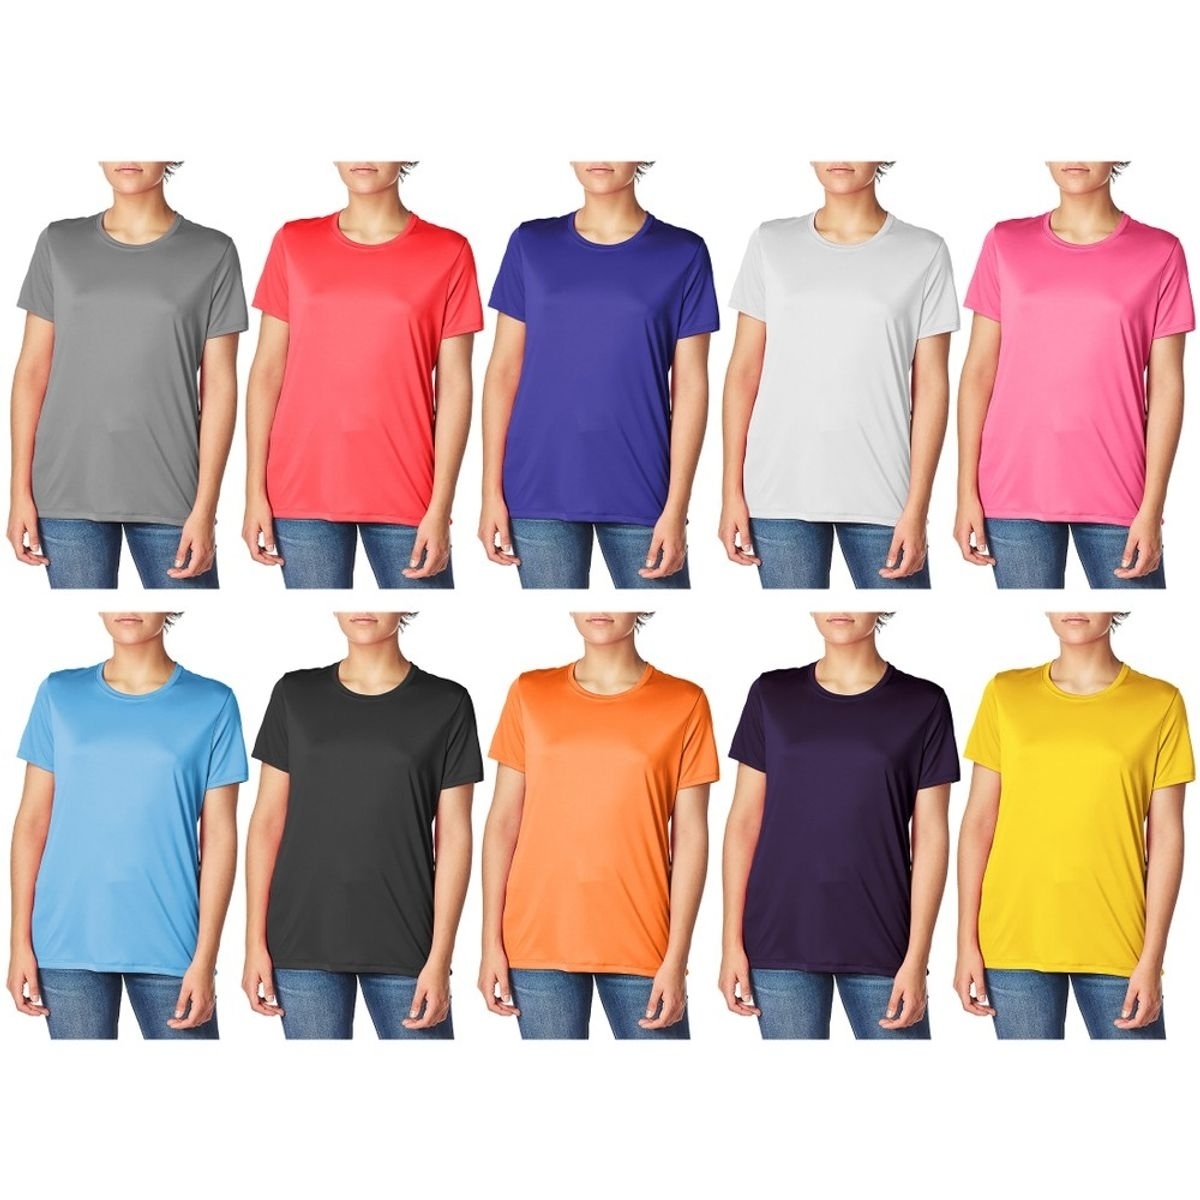 4-Pack: Women's Cool Dri-FIt Moisture Wicking Sim-Fit Long Sleeve Crew Neck T-Shirts - X-large